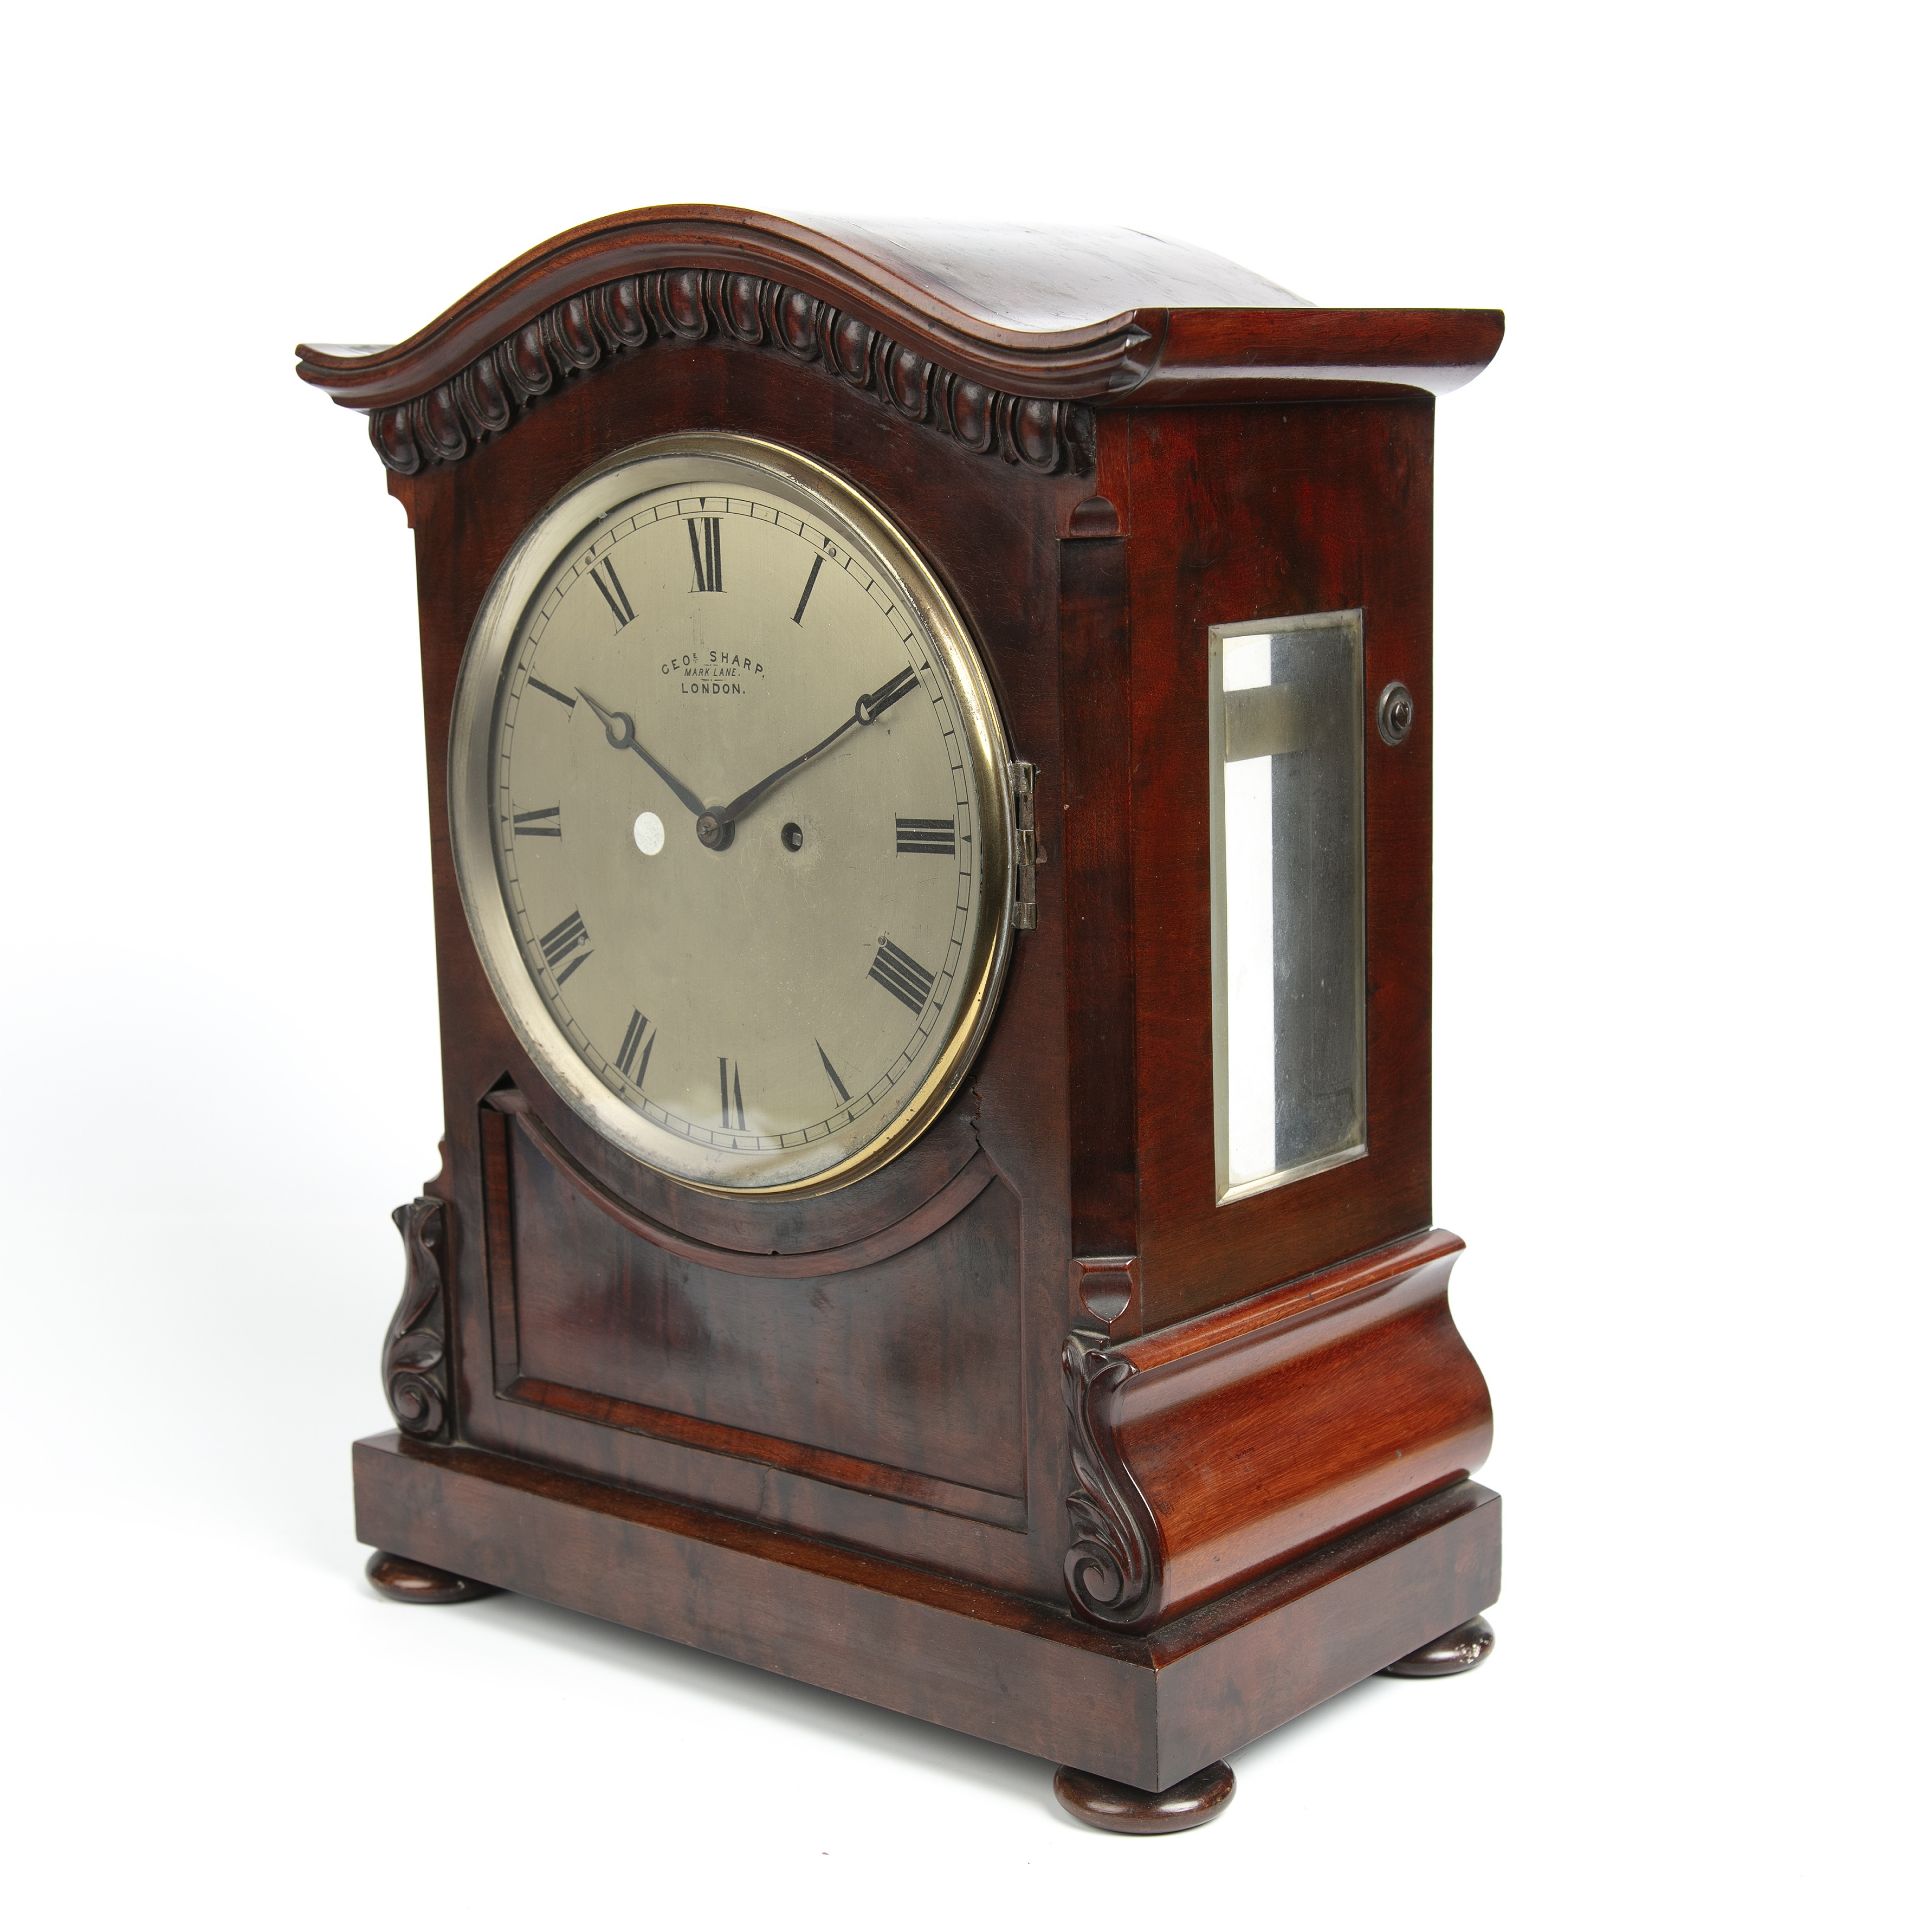 An early 19th century bracket clock by George Sharp having a silvered dial with Roman numerals and a - Bild 3 aus 5